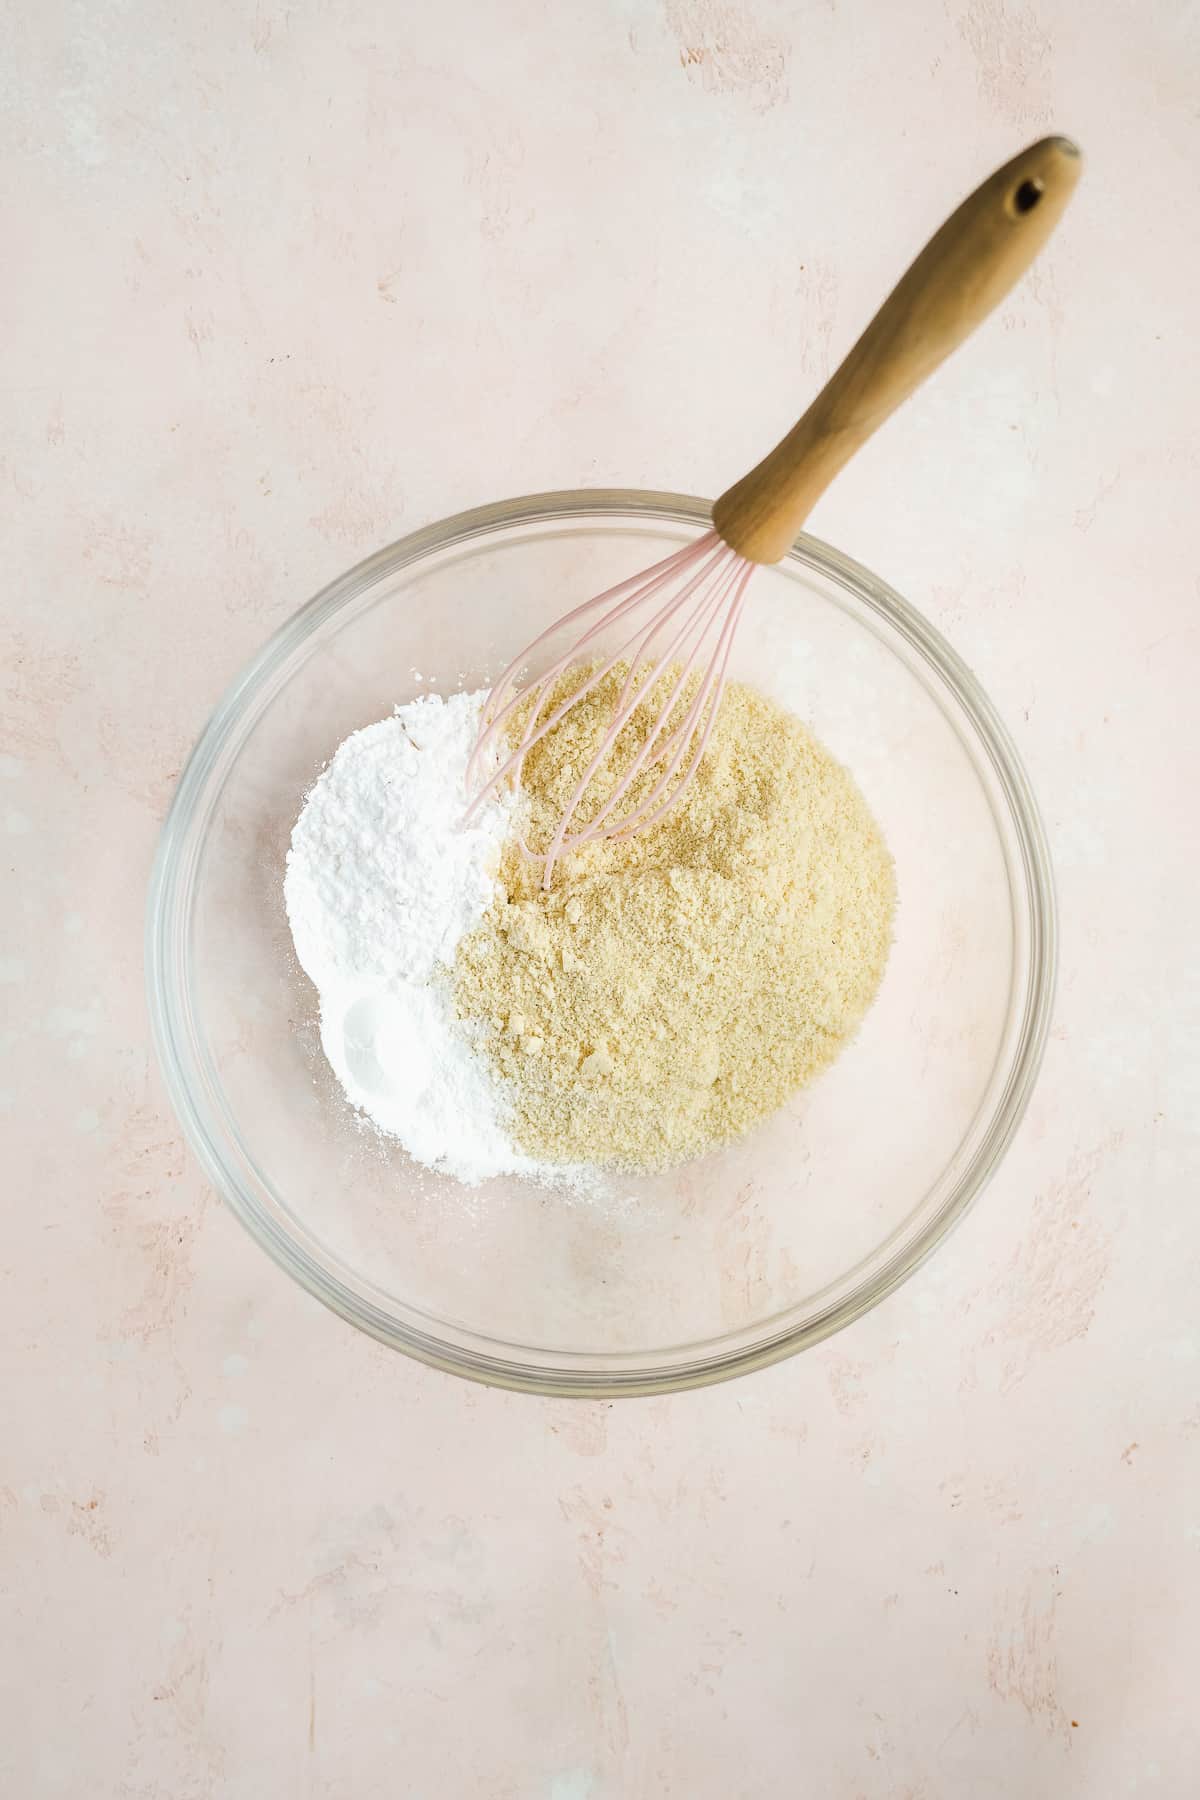 Glass bowl with flour ingredients and a whisk on a light pink surface.